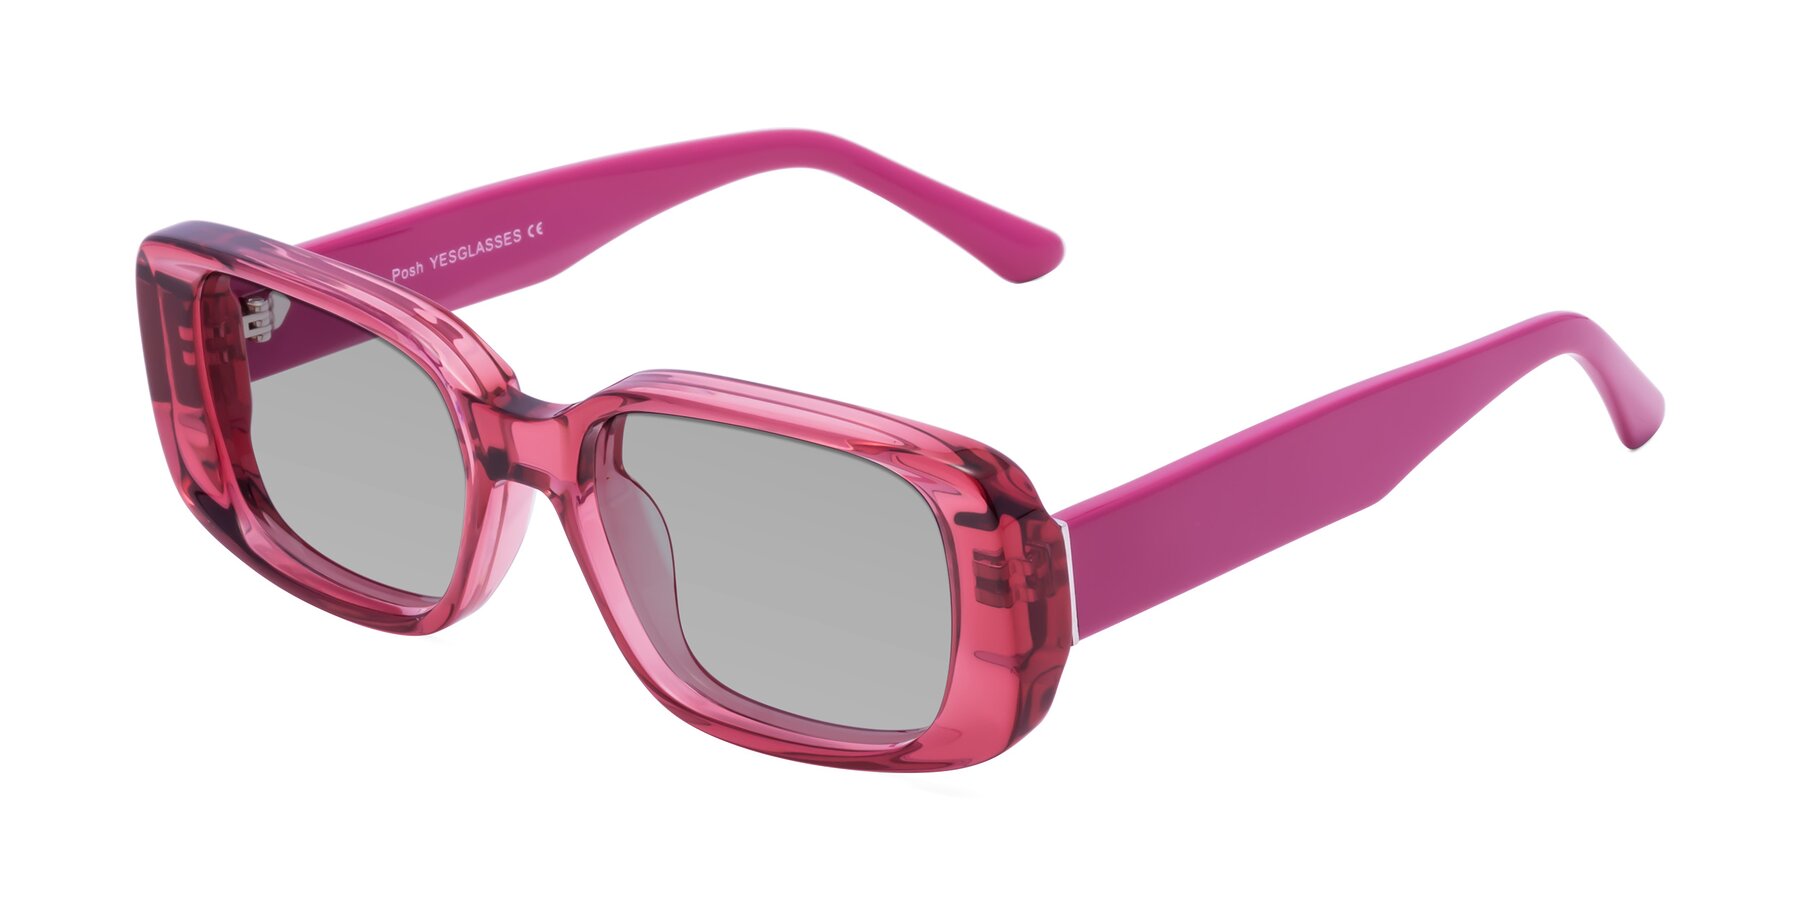 Angle of Posh in Transparent Pink with Light Gray Tinted Lenses